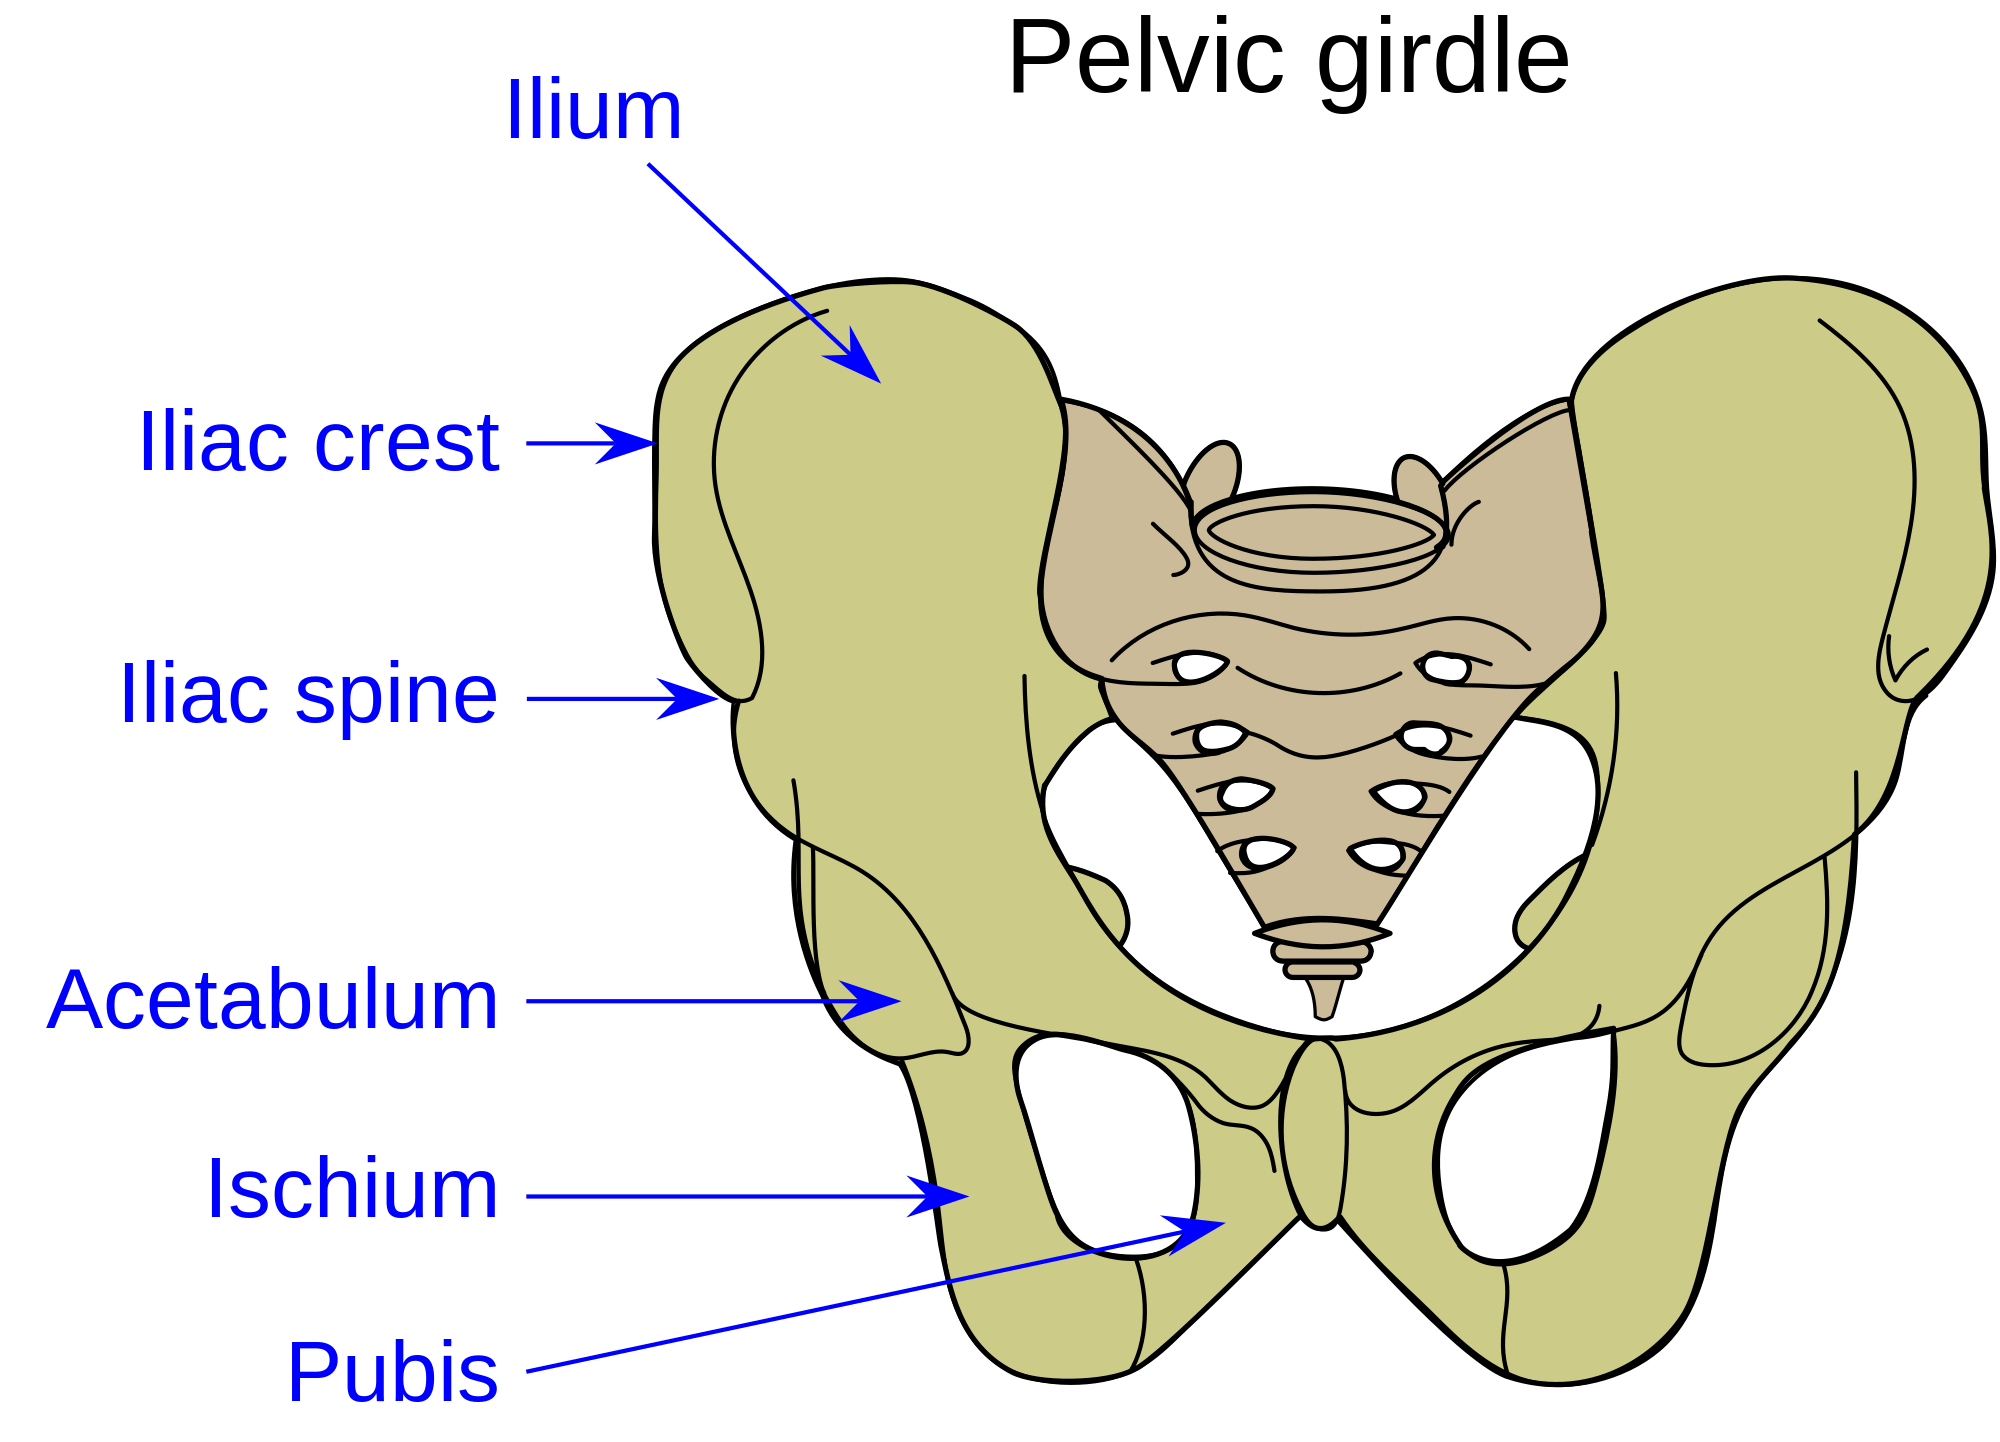 You should feel your pubic bone pressing into the floor, and if you look down from where it's labelled 'iliac crest' to where it ends, you should feel the 2 bony points on either side there too. 